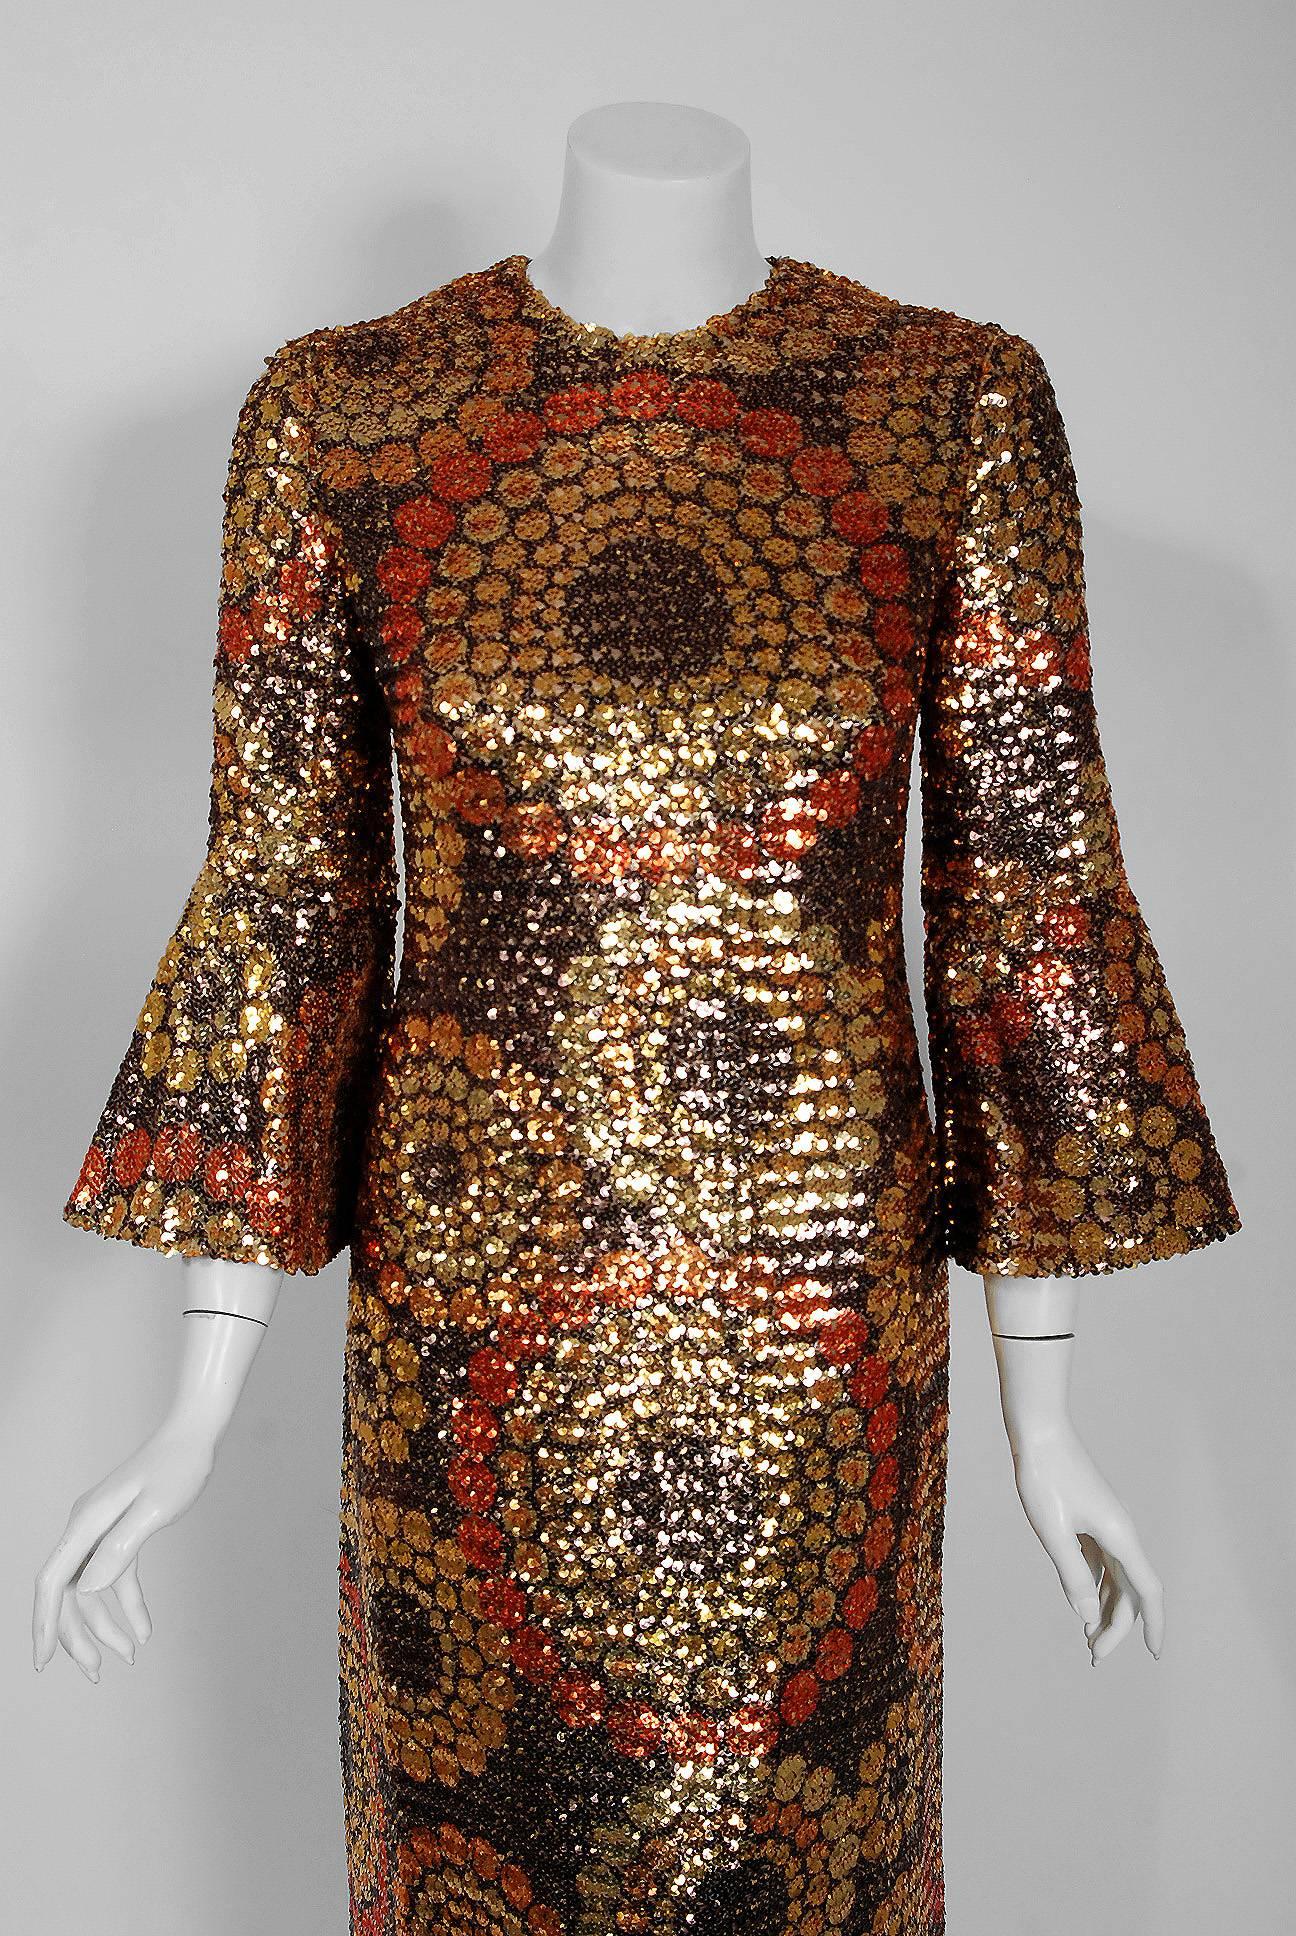 Breathtaking Pierre Balmain Haute-Couture documented ombre graphic sequin dress dating back to his opulent 1968 collection. This iconic designer created a very sculptural quality which was always allied with a ladylike essence. His garments have a